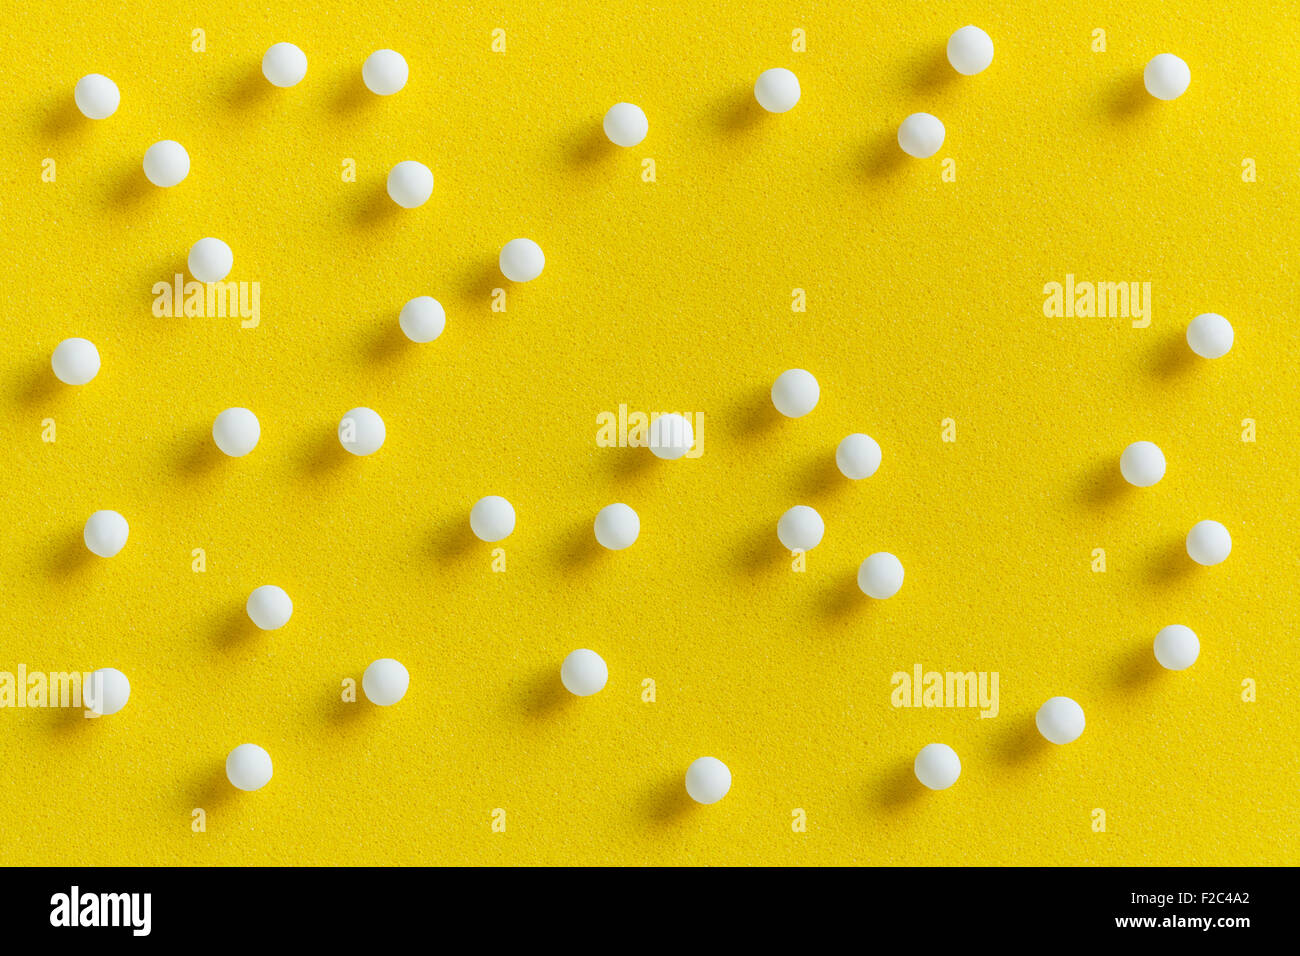 Overhead view of homeopathic pills (made from inert substance - sugar/lactose) scattered on a yellow surface. Stock Photo